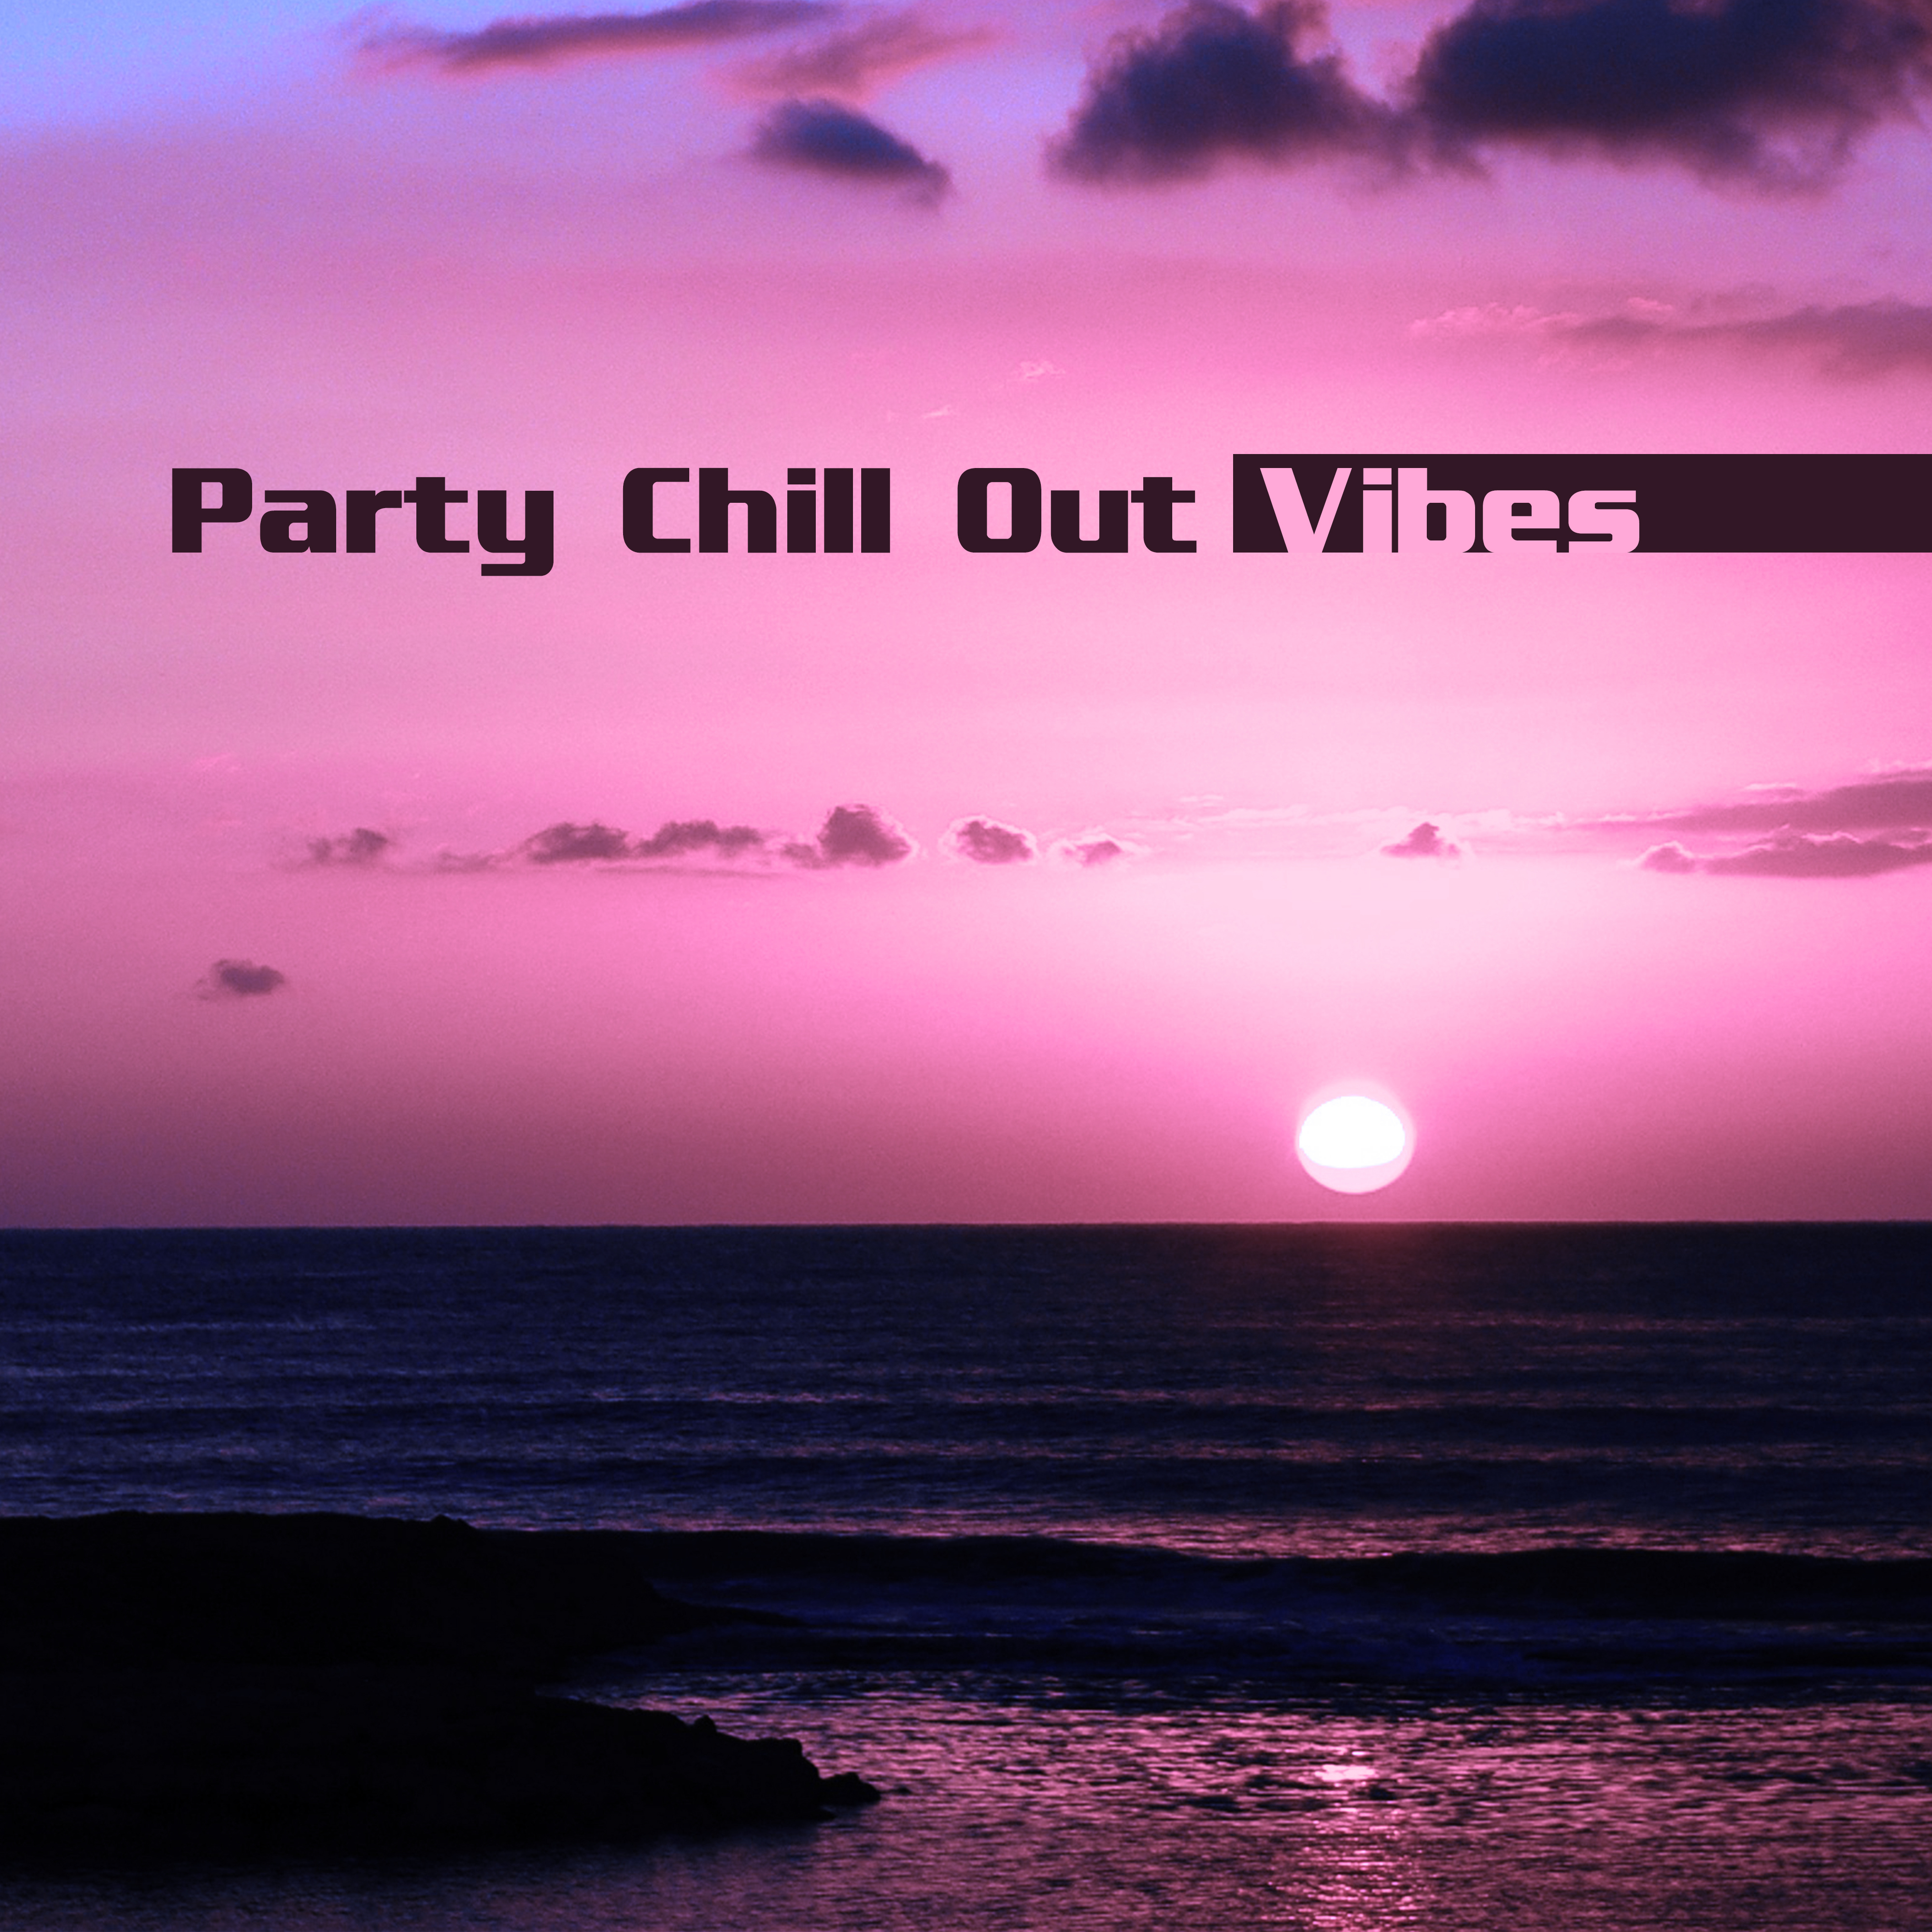 Party Chill Out Vibes  Ibiza Party Time, Chill Out Beach Music, Evening Sounds